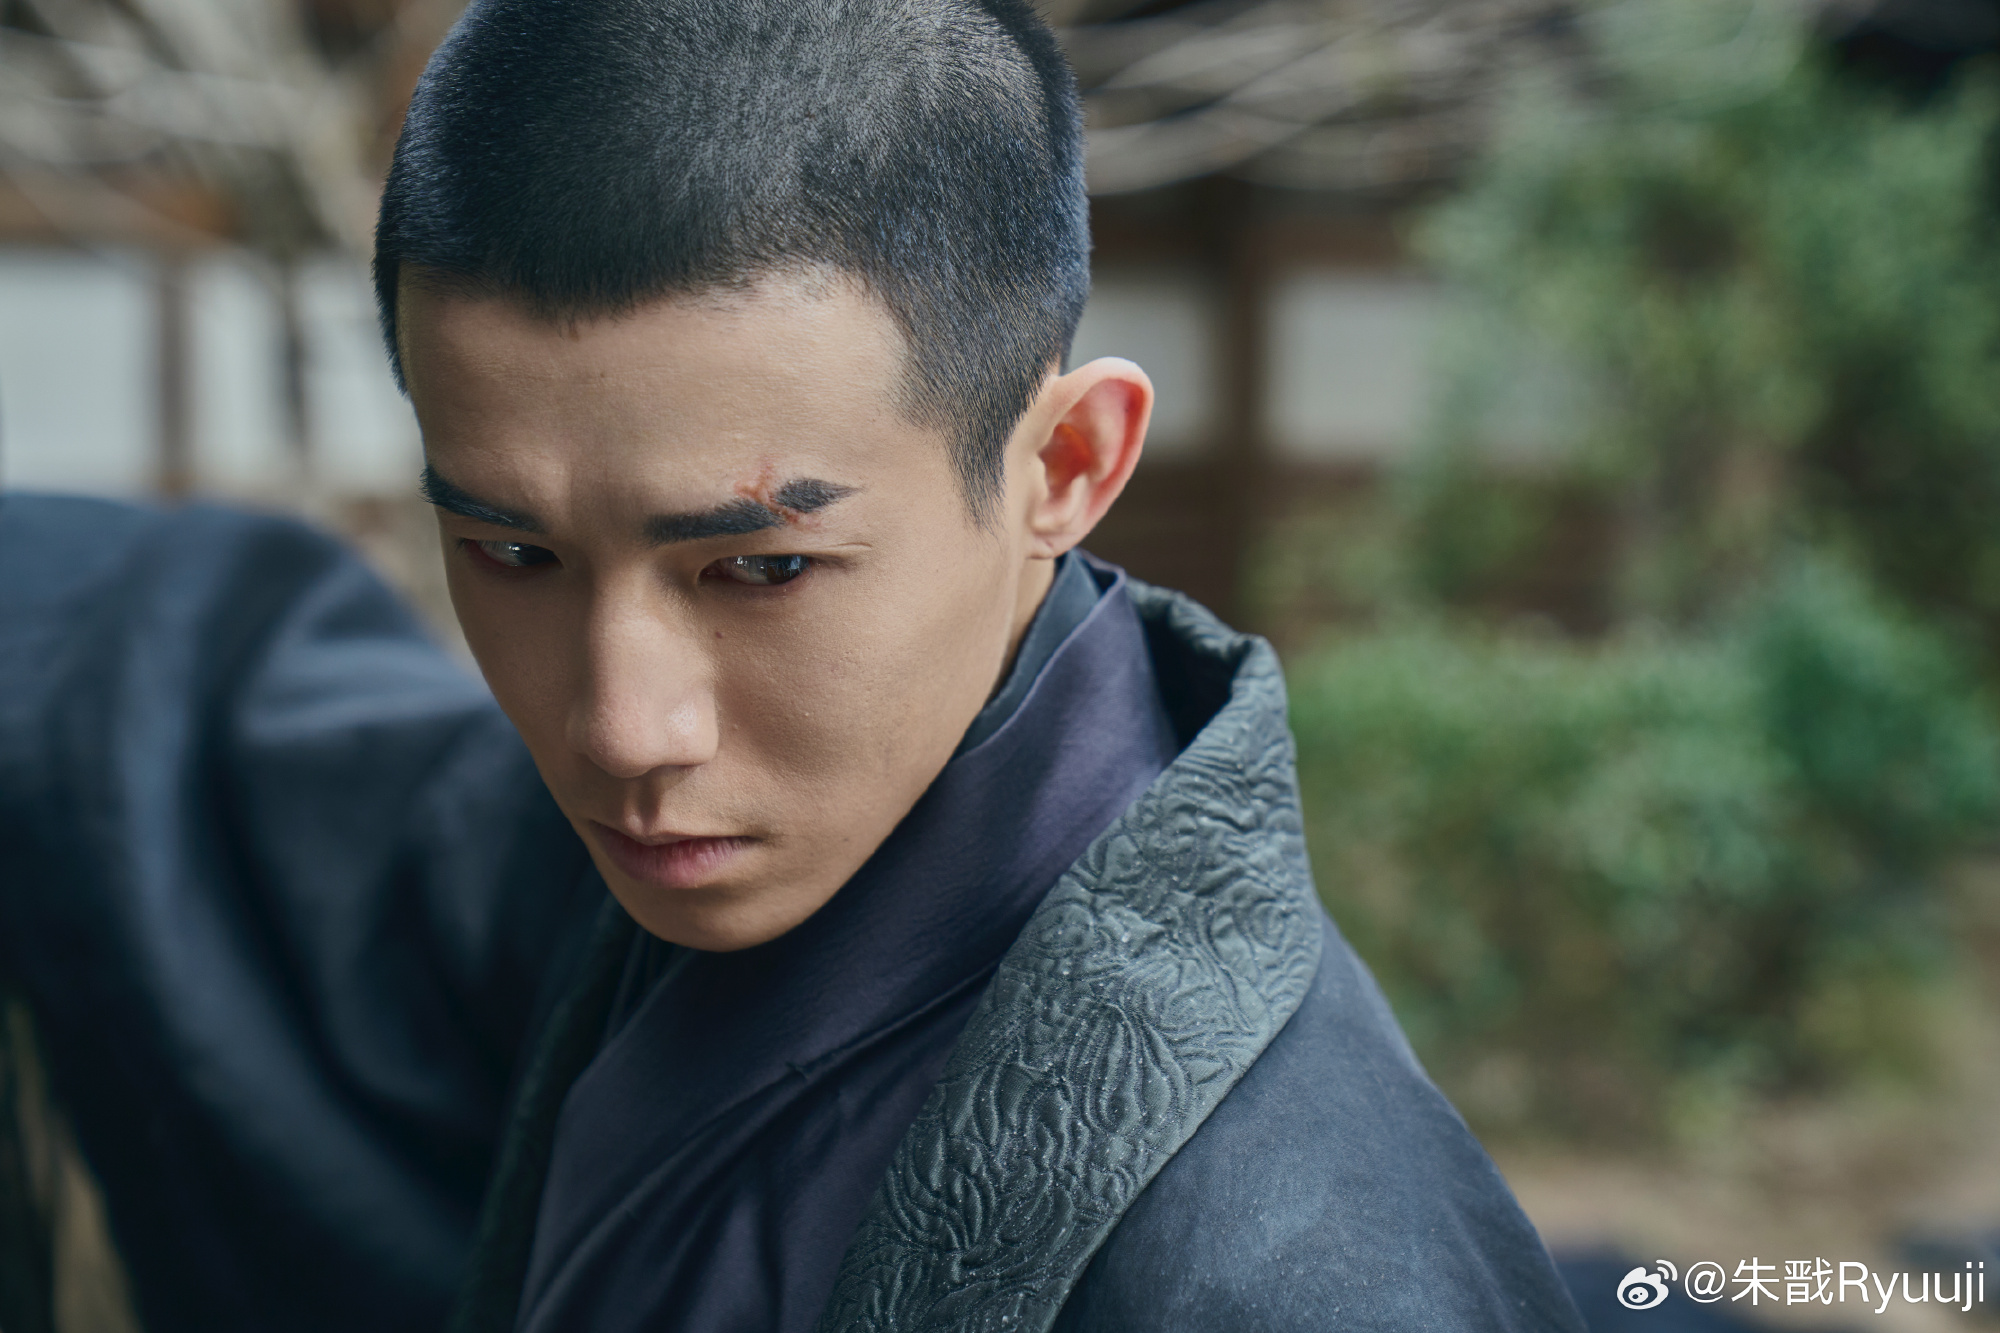 Post: #云之羽 寒鸦柒这小寸头怎么还不扑街 😡 ​​​
#MyJourneyToYou Cold Crow Seven how come this little inch hasn't pounced 😡
